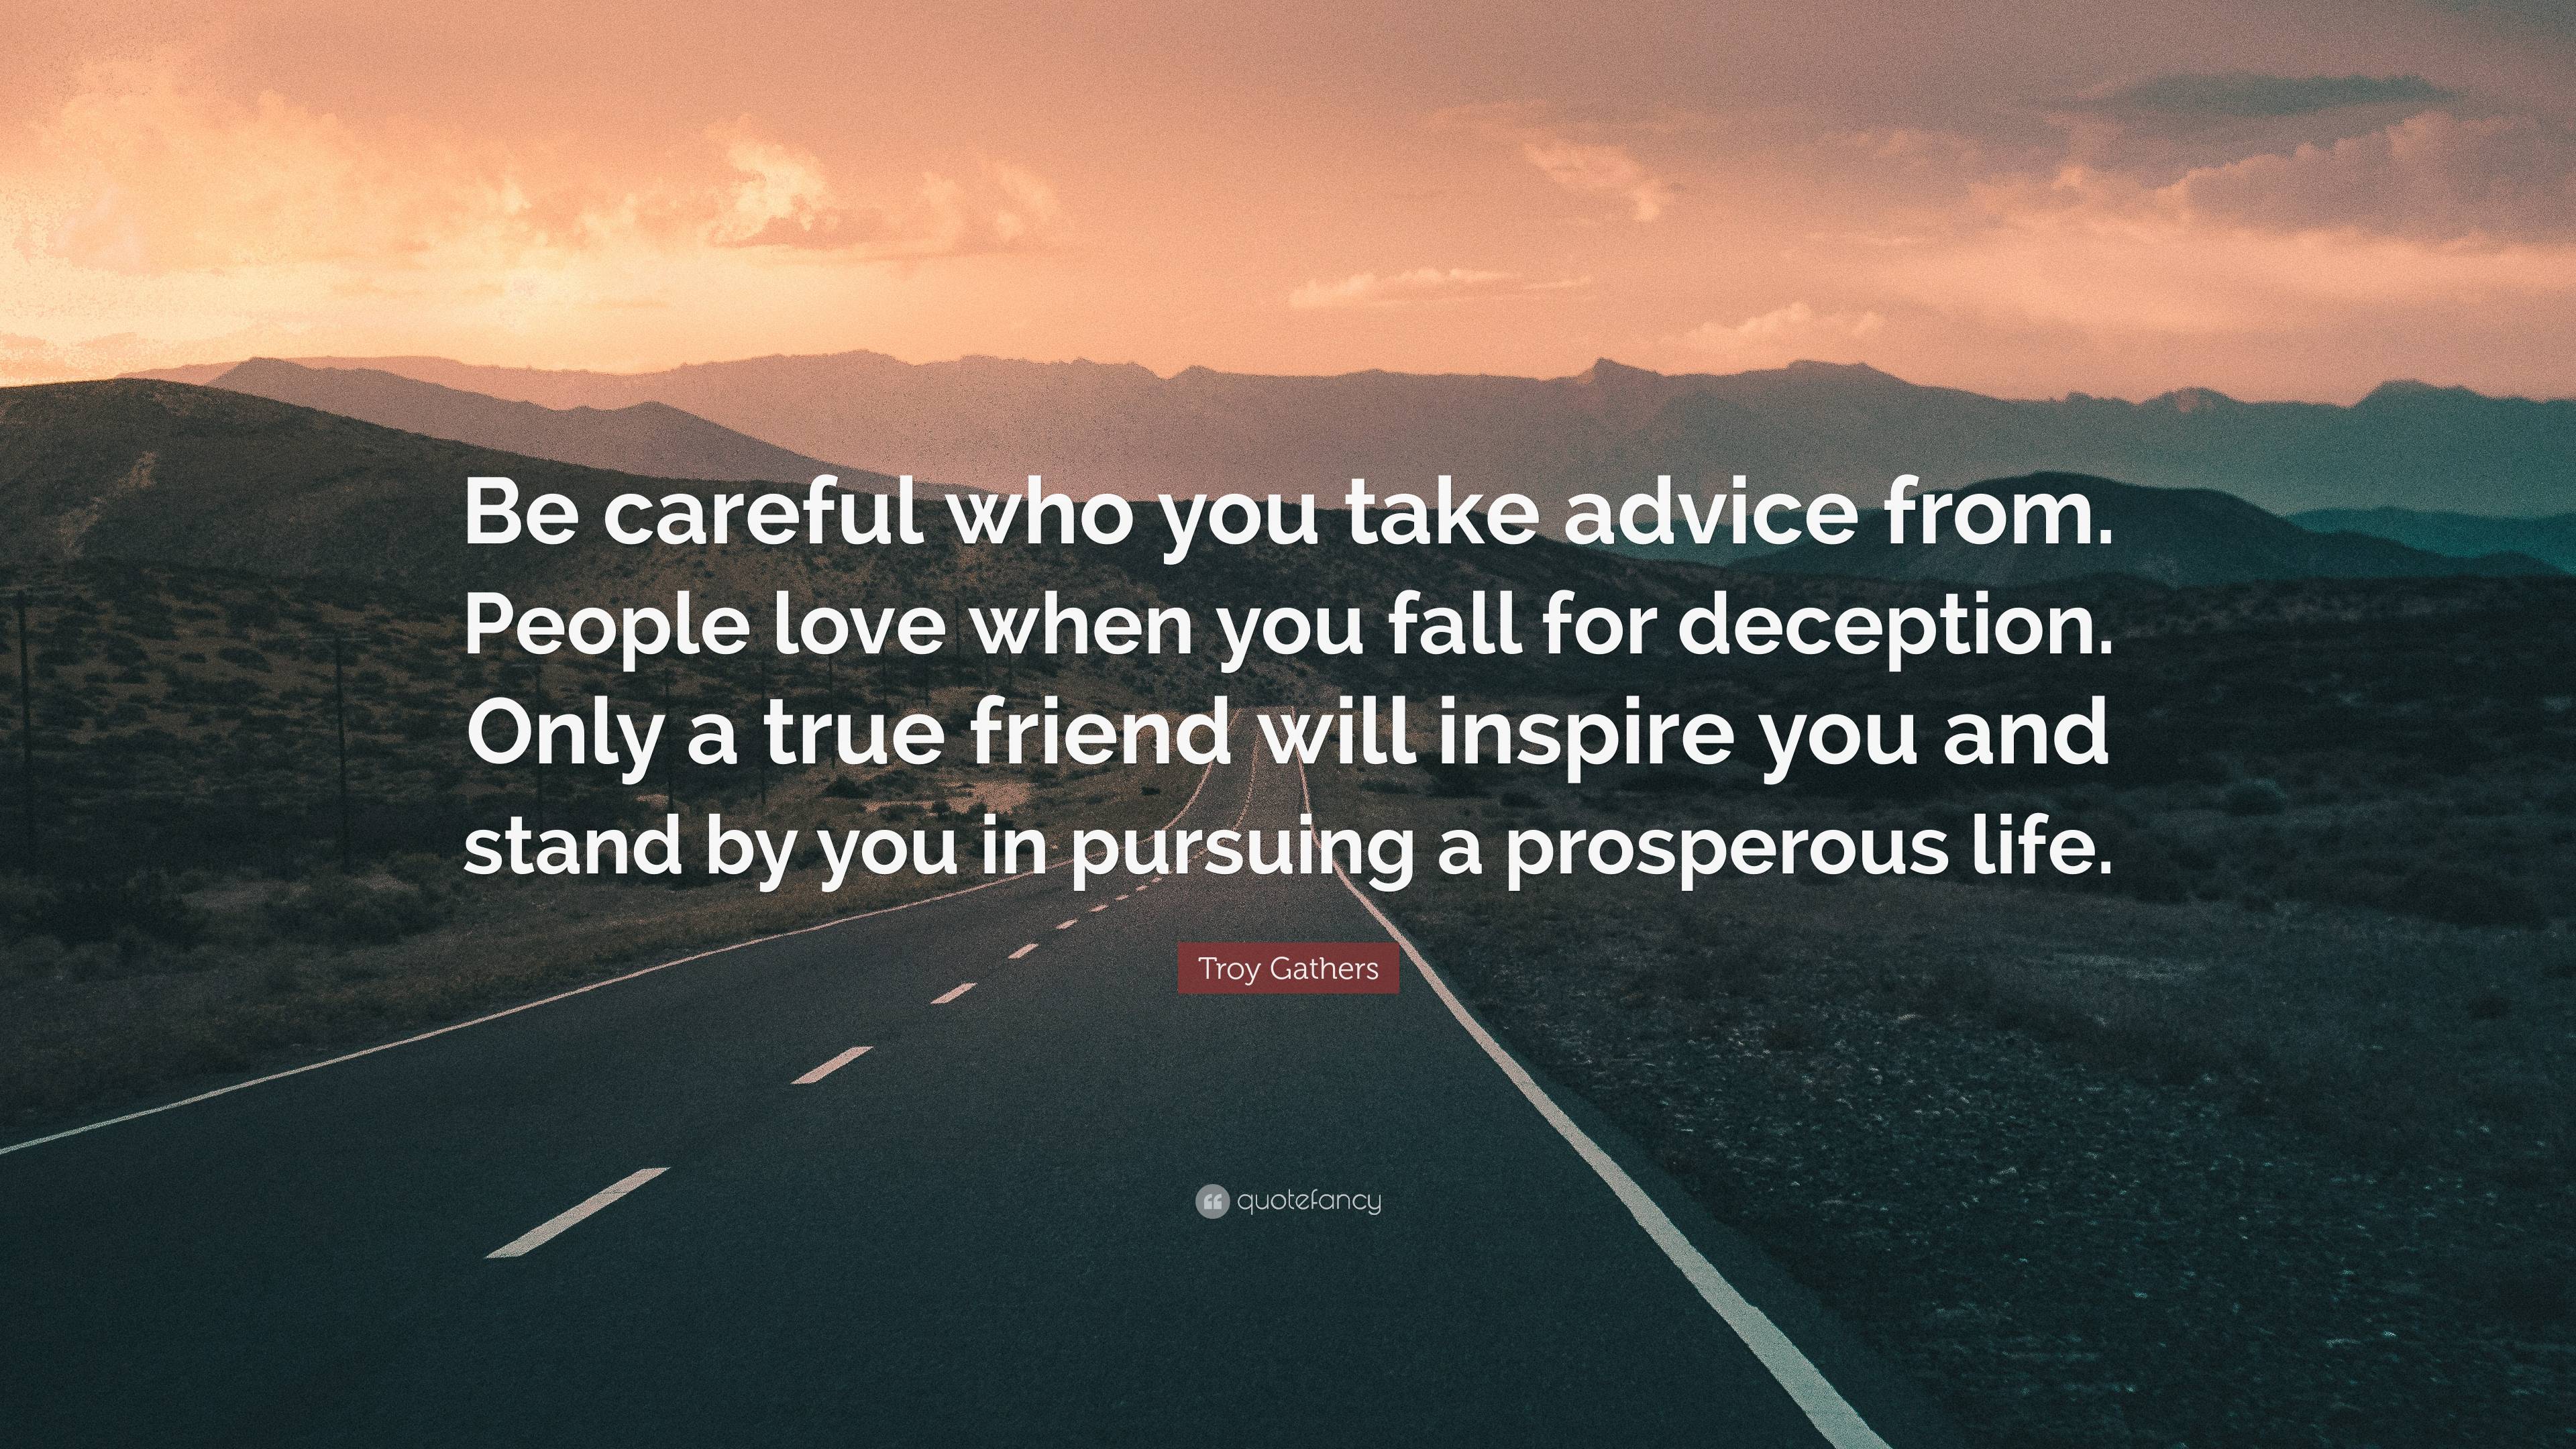 Troy Gathers Quote: “Be careful who you take advice from. People love ...